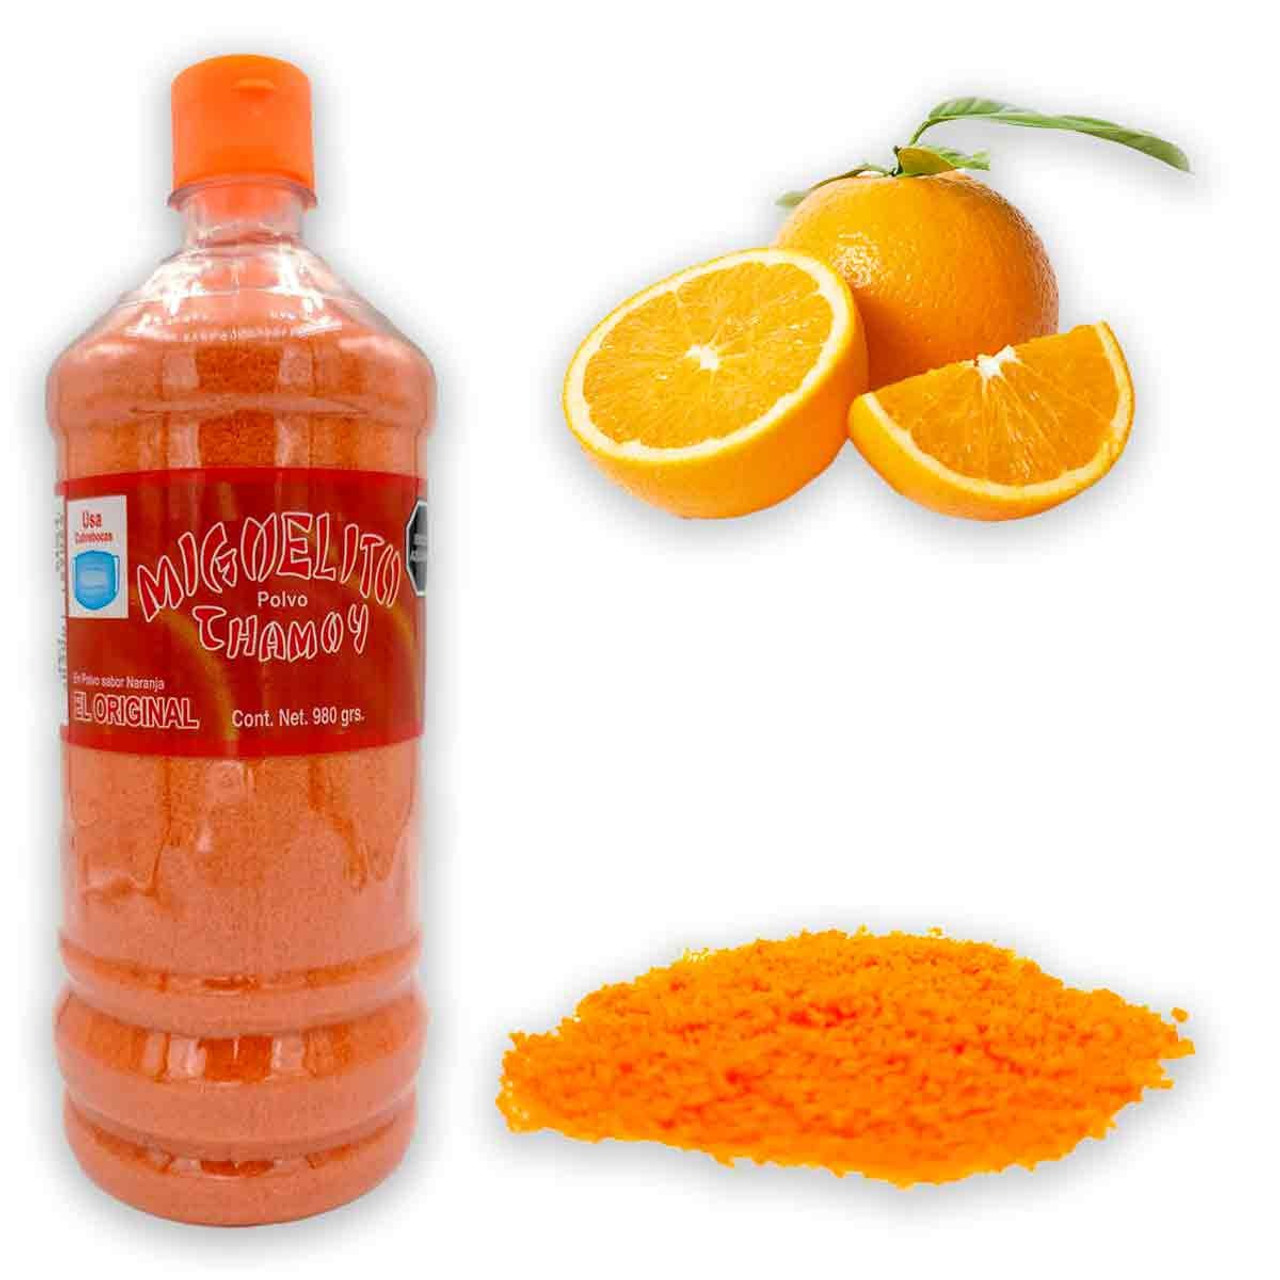 Bottle of 980 grams of delicious sugary and granulated powders from the mexican brand "Miguelito" with the rich flavors of chamoy and oranges combined.